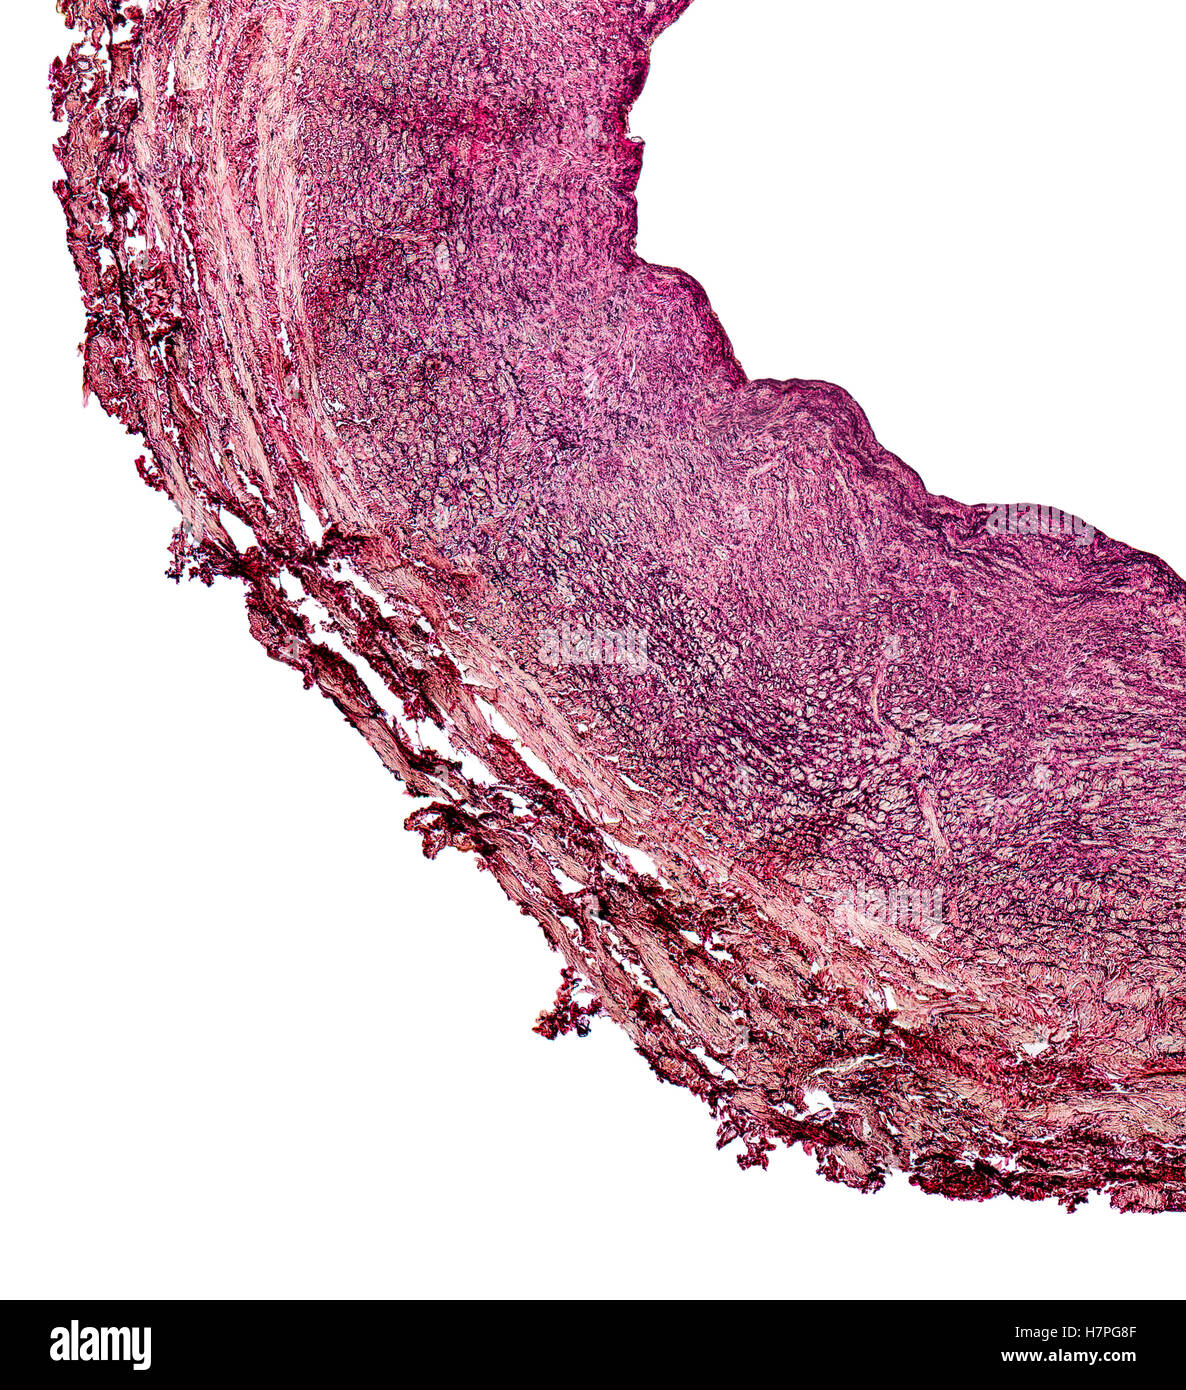 microscopic detail showing a cross section of a human blood vessel Stock Photo